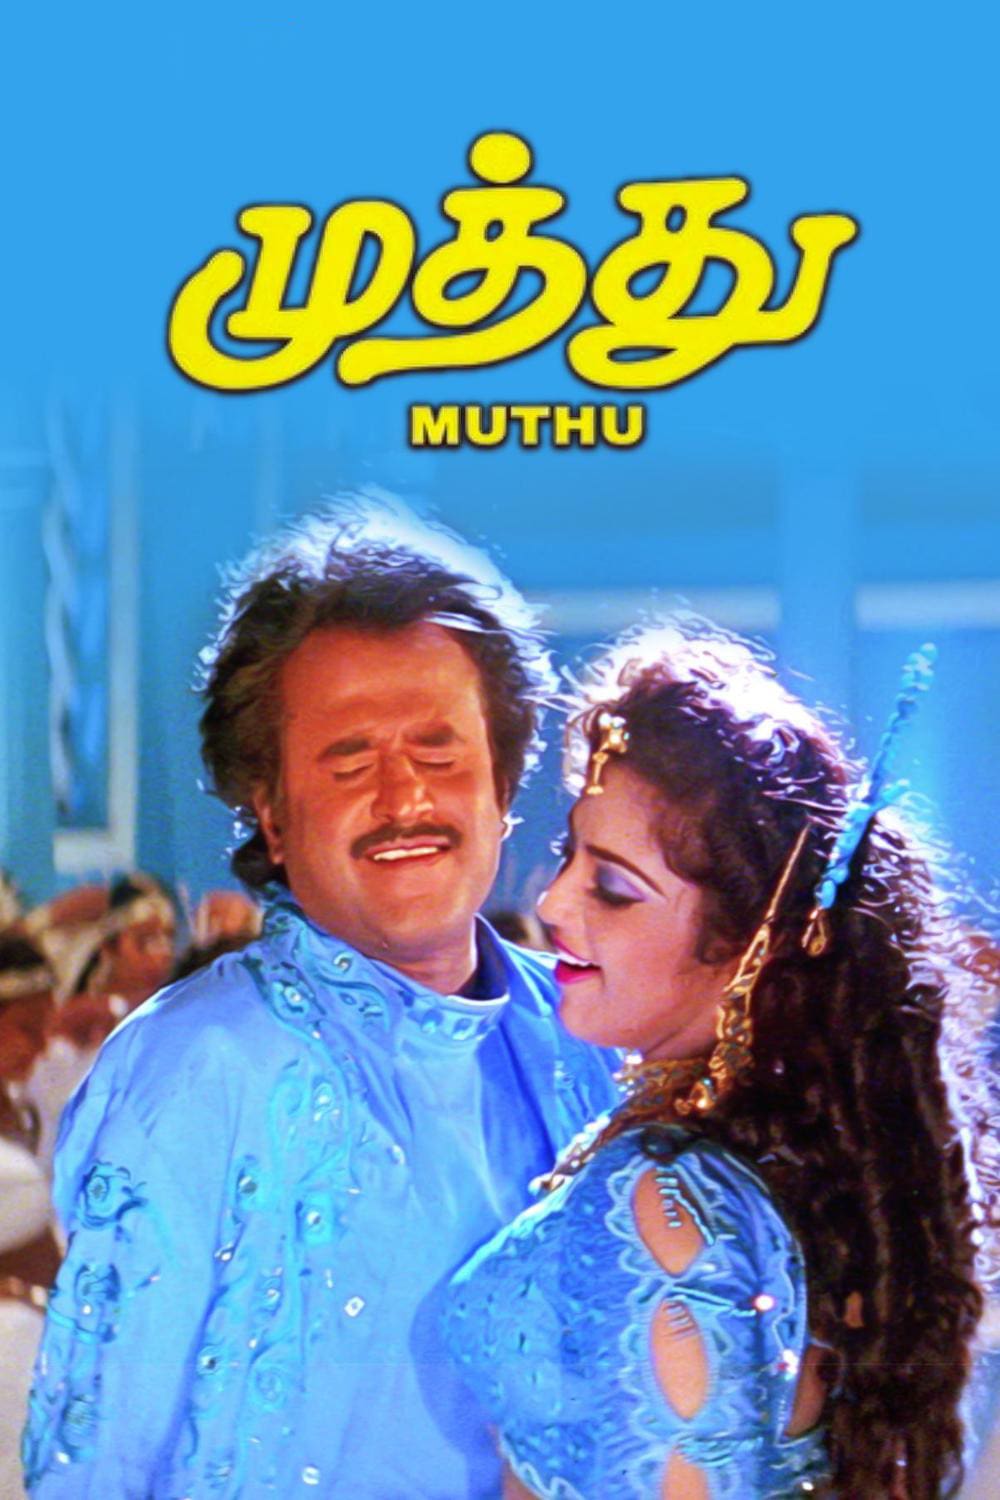 Poster for the movie "Muthu"